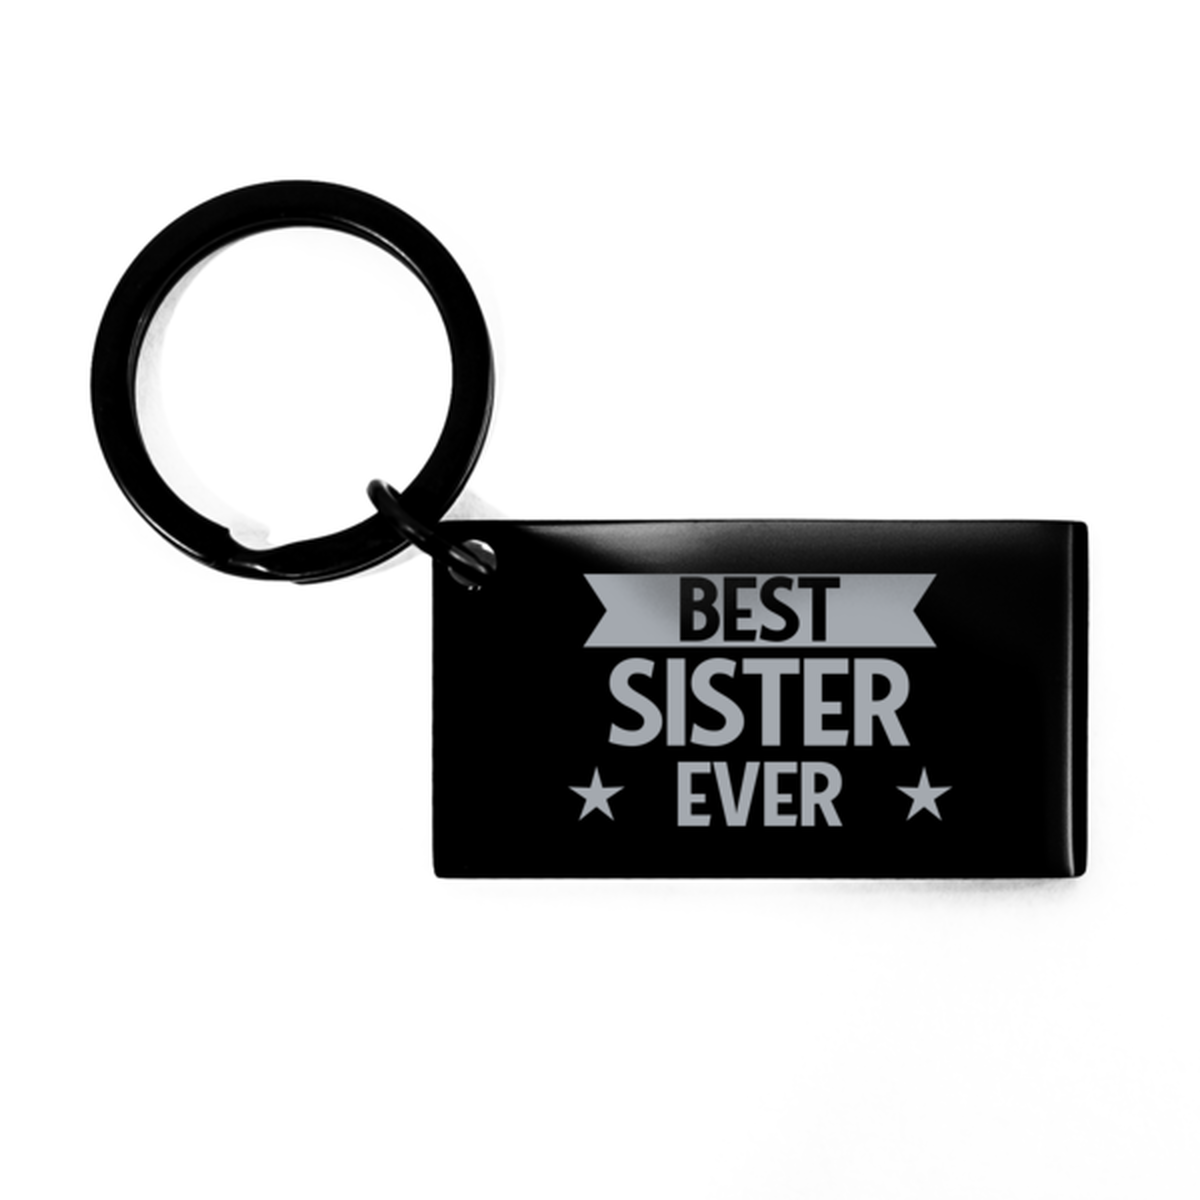 Best Sister Ever Sister Gifts, Funny Black Keychain For Sister, Birthday Engraved Keyring Presents For Women